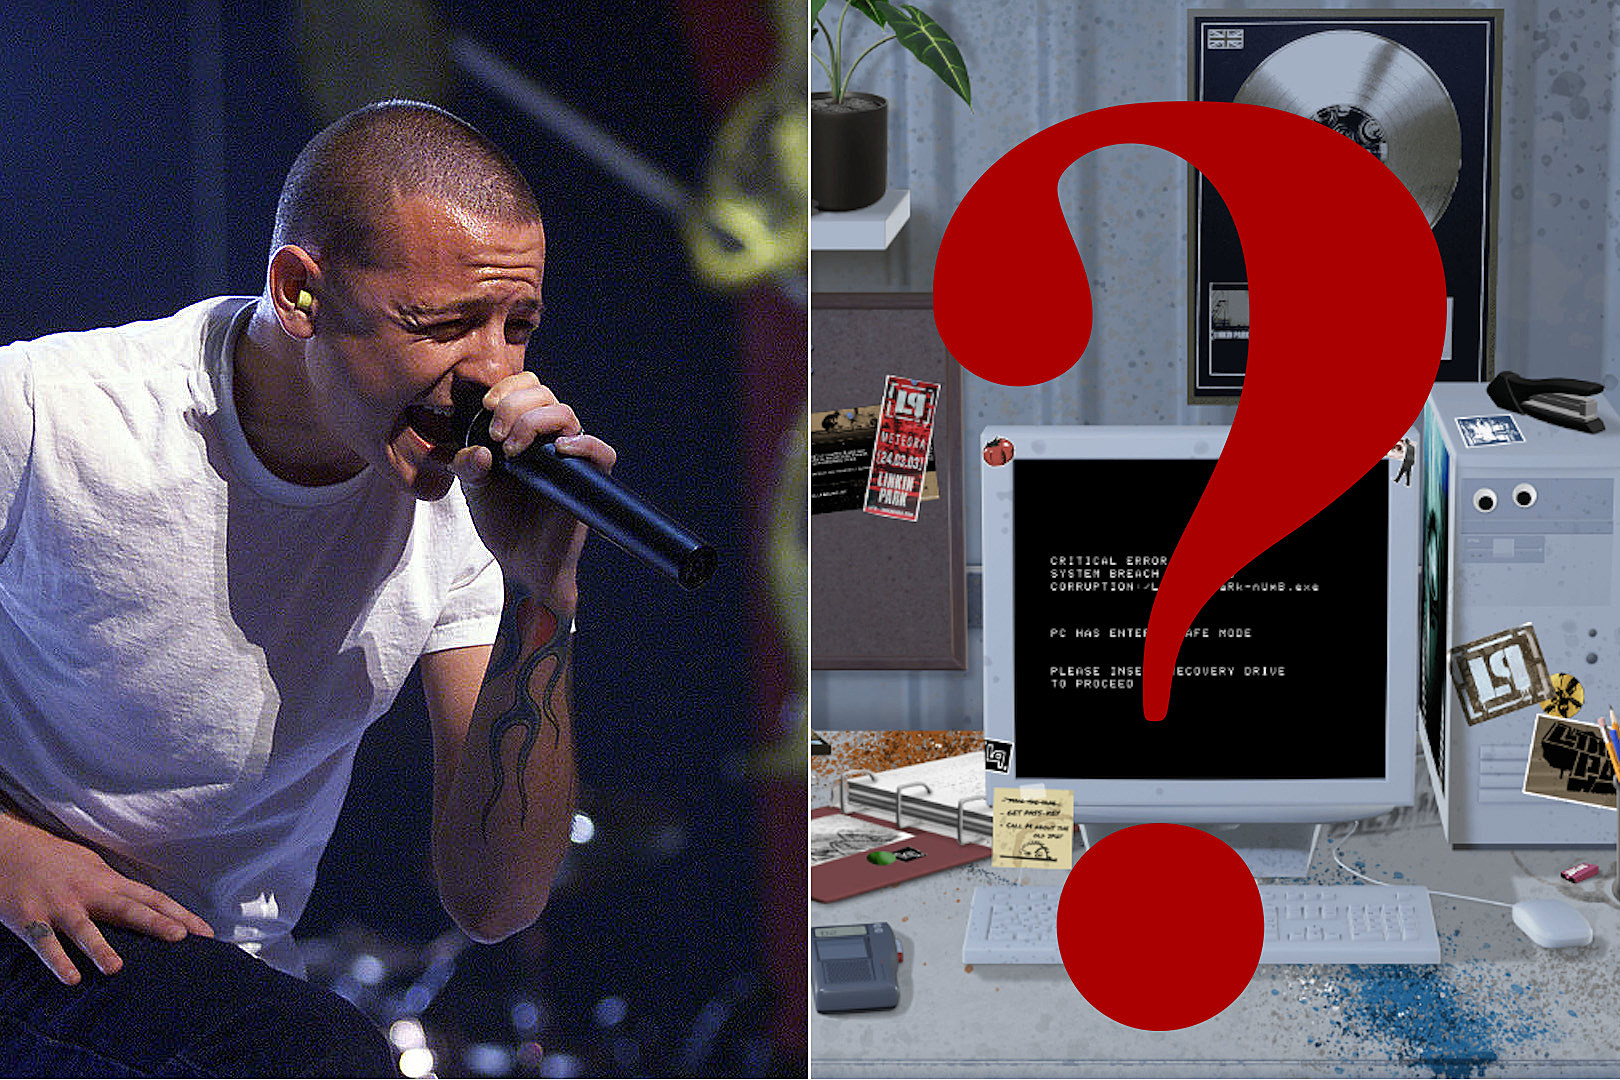 Linkin Park Launch Puzzle on Website, Here’s What We’ve Uncovered